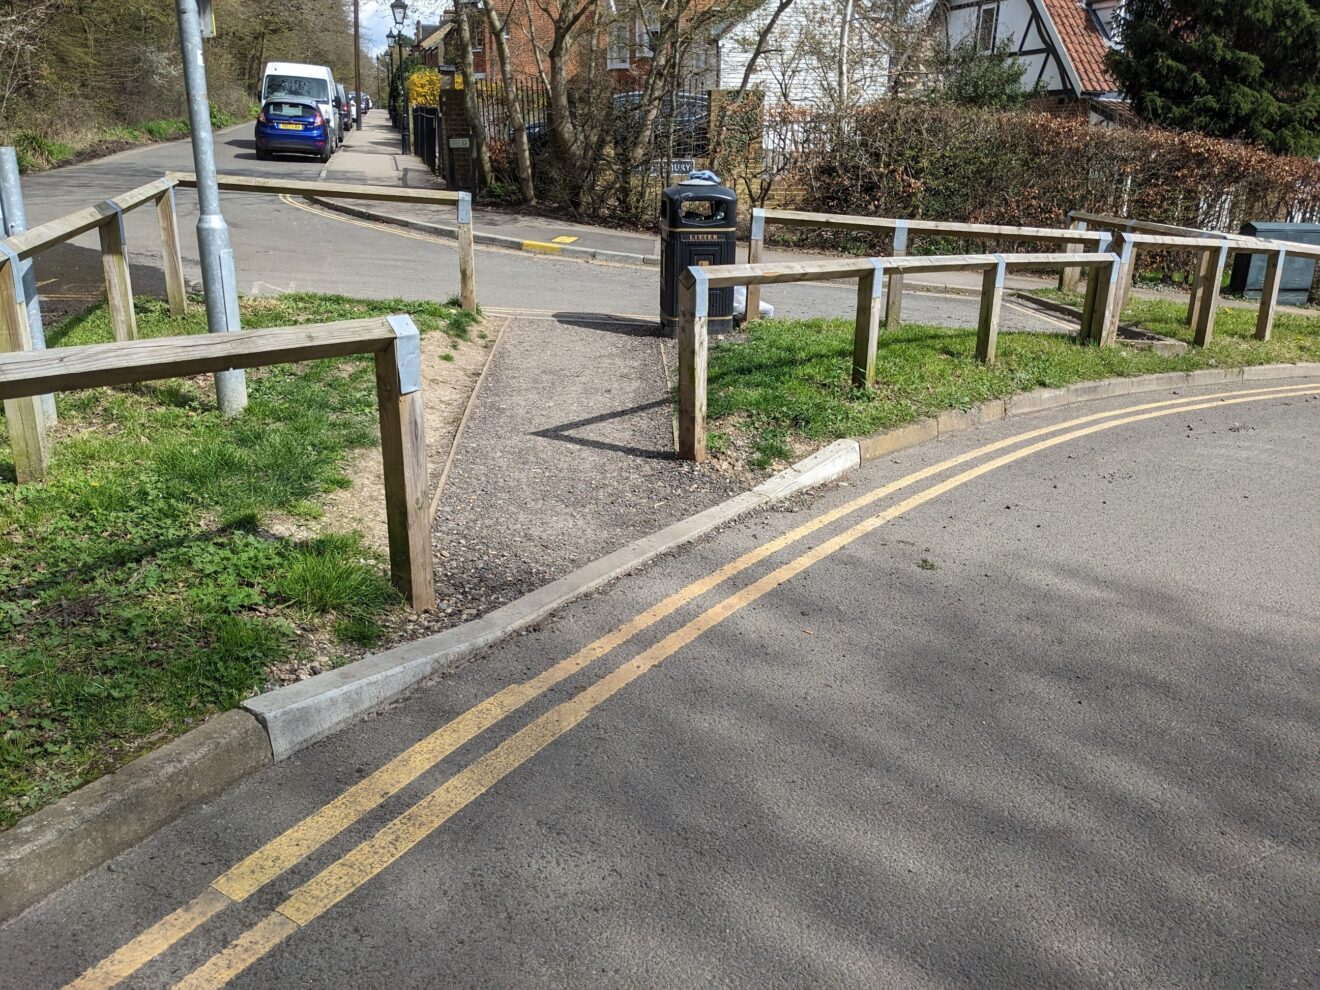 Photo showing drop kerb access through road closure on Staples Road